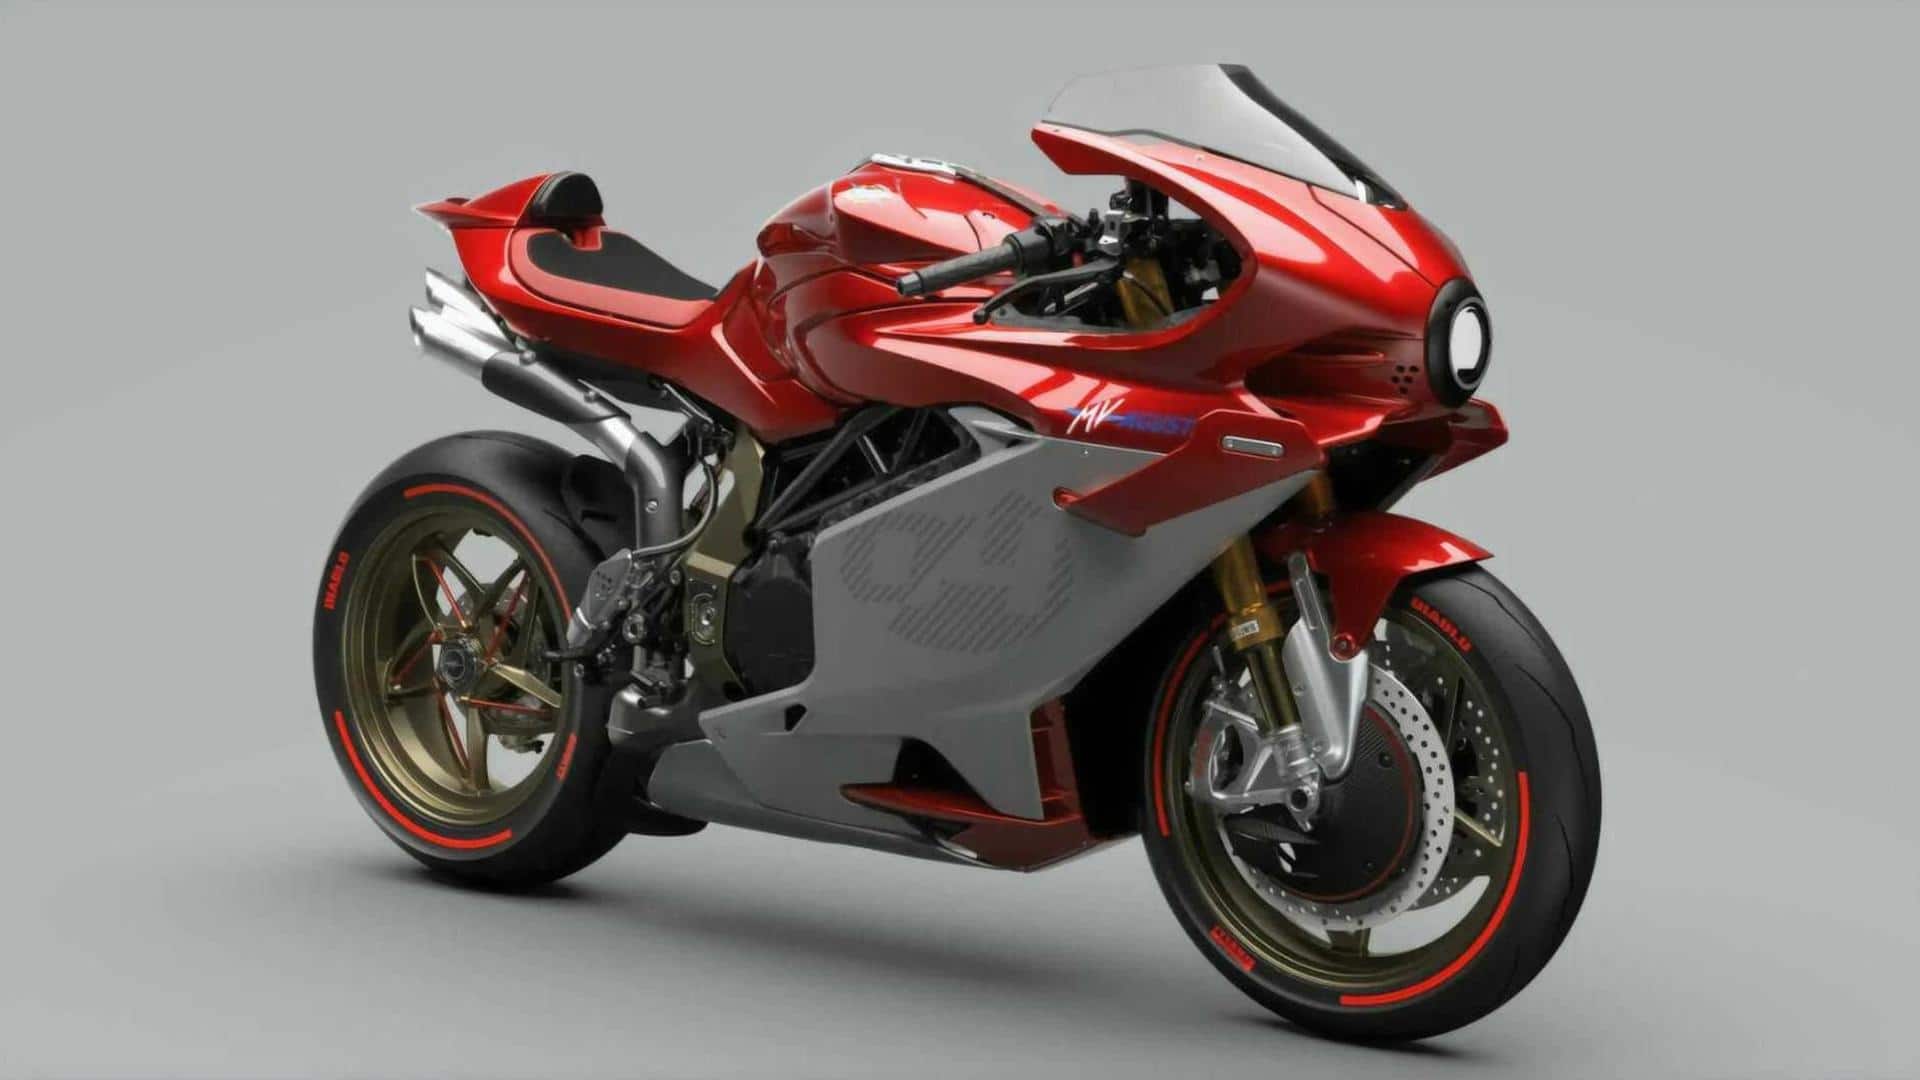 Super-exclusive MV Agusta Superveloce 1000 Serie Oro revealed: Check features